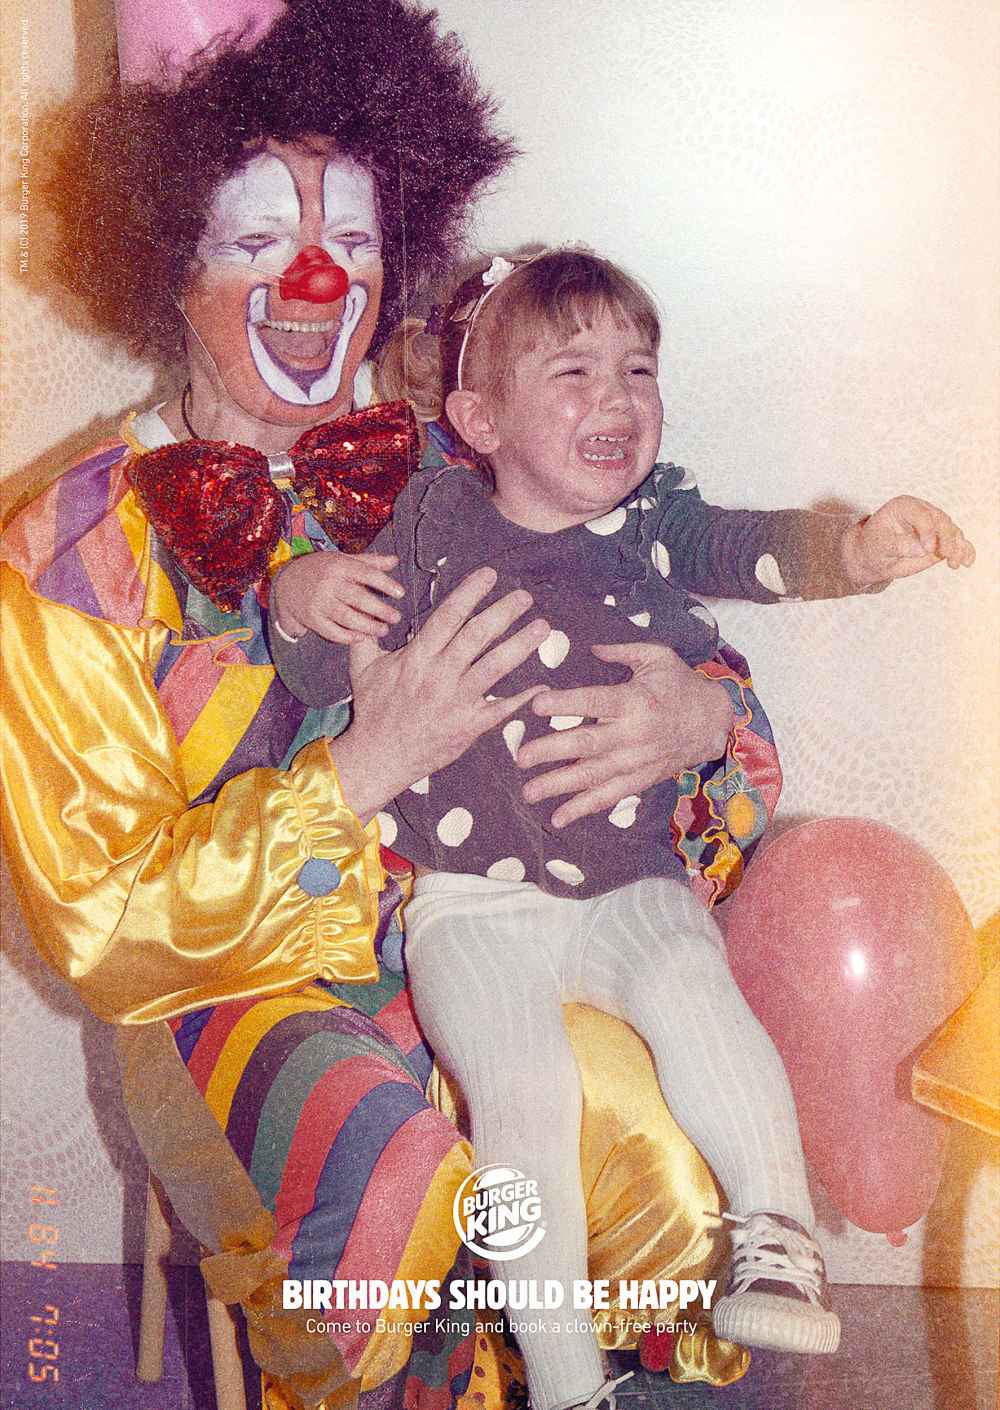 Burger King Trolls McDonald's With a Series of Scary Clown Ads